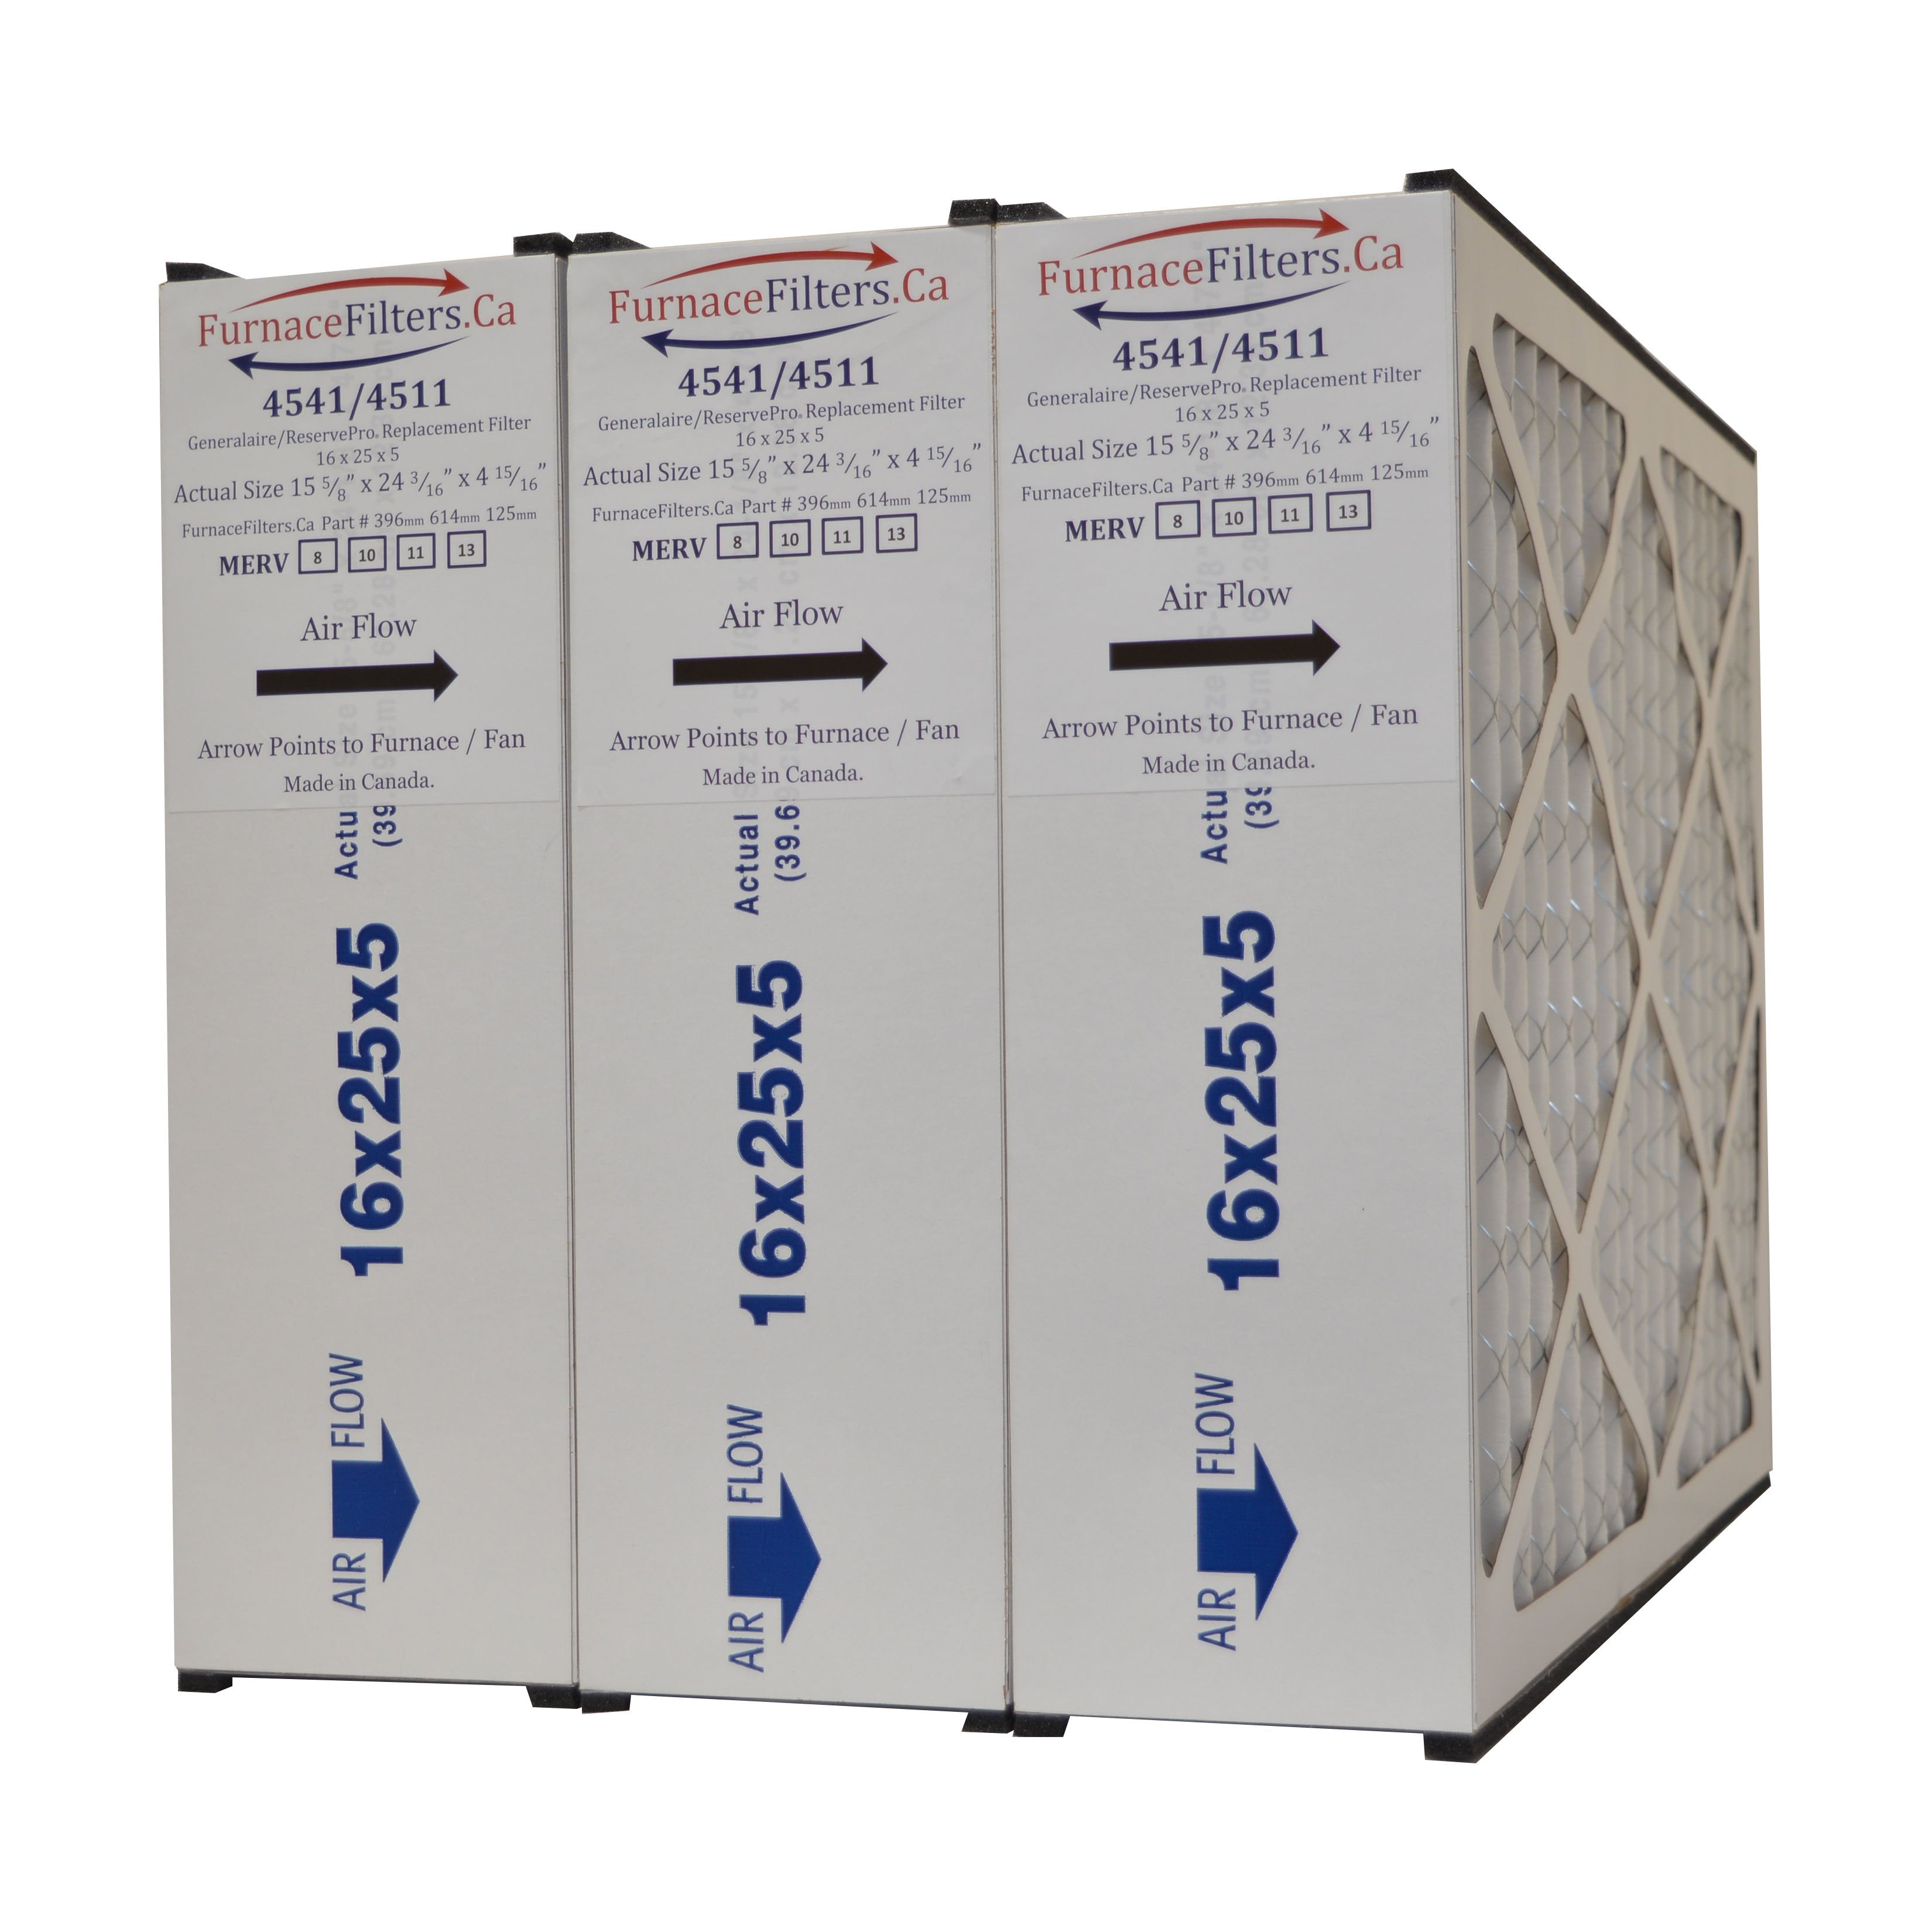 Generalaire GF 4511 MERV 13 16x25x5 Furnace Filter for Mac 1400 Air Cleaners. Package of 3. Made by FurnaceFilters.Ca